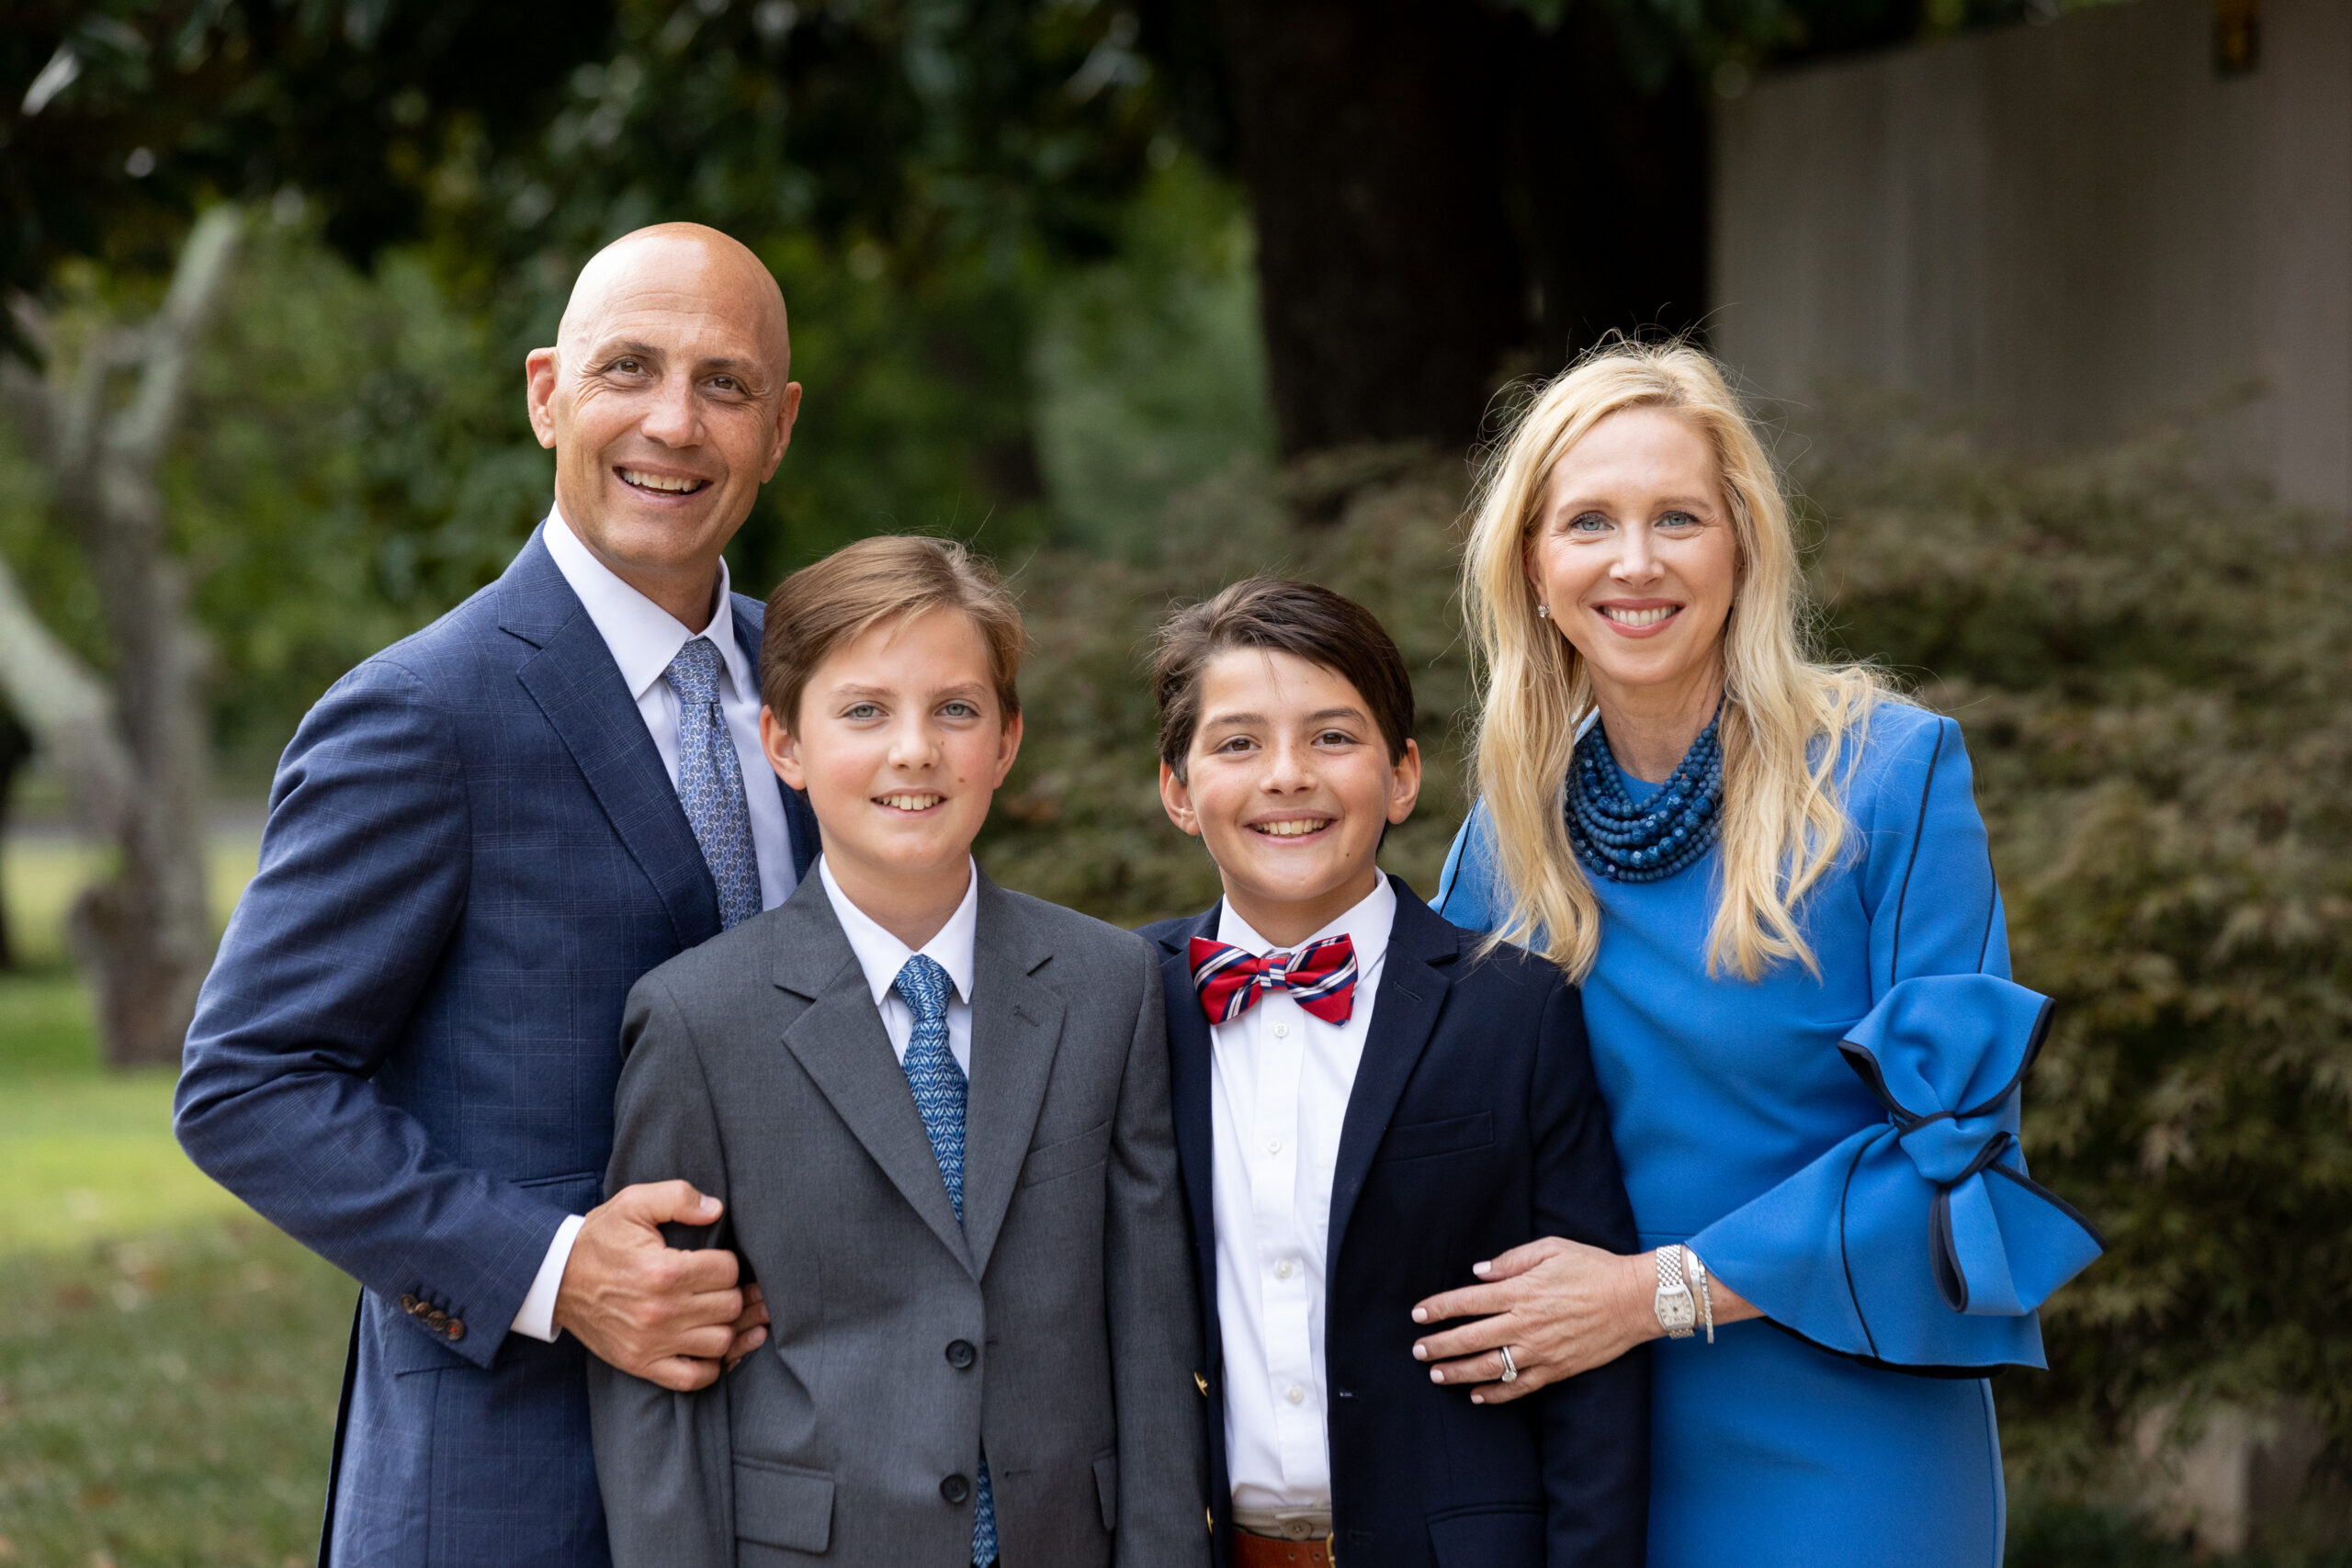 Jacob's lovely family at Jacob's Sporty Bar Mitzvah Party at Pearl Street Warehouse in Washington, DC | Pop Color Events | Adding a Pop of Color to Bar & Bat Mitzvahs in DC, MD & VA | Photo by: Jessica Latos Photography